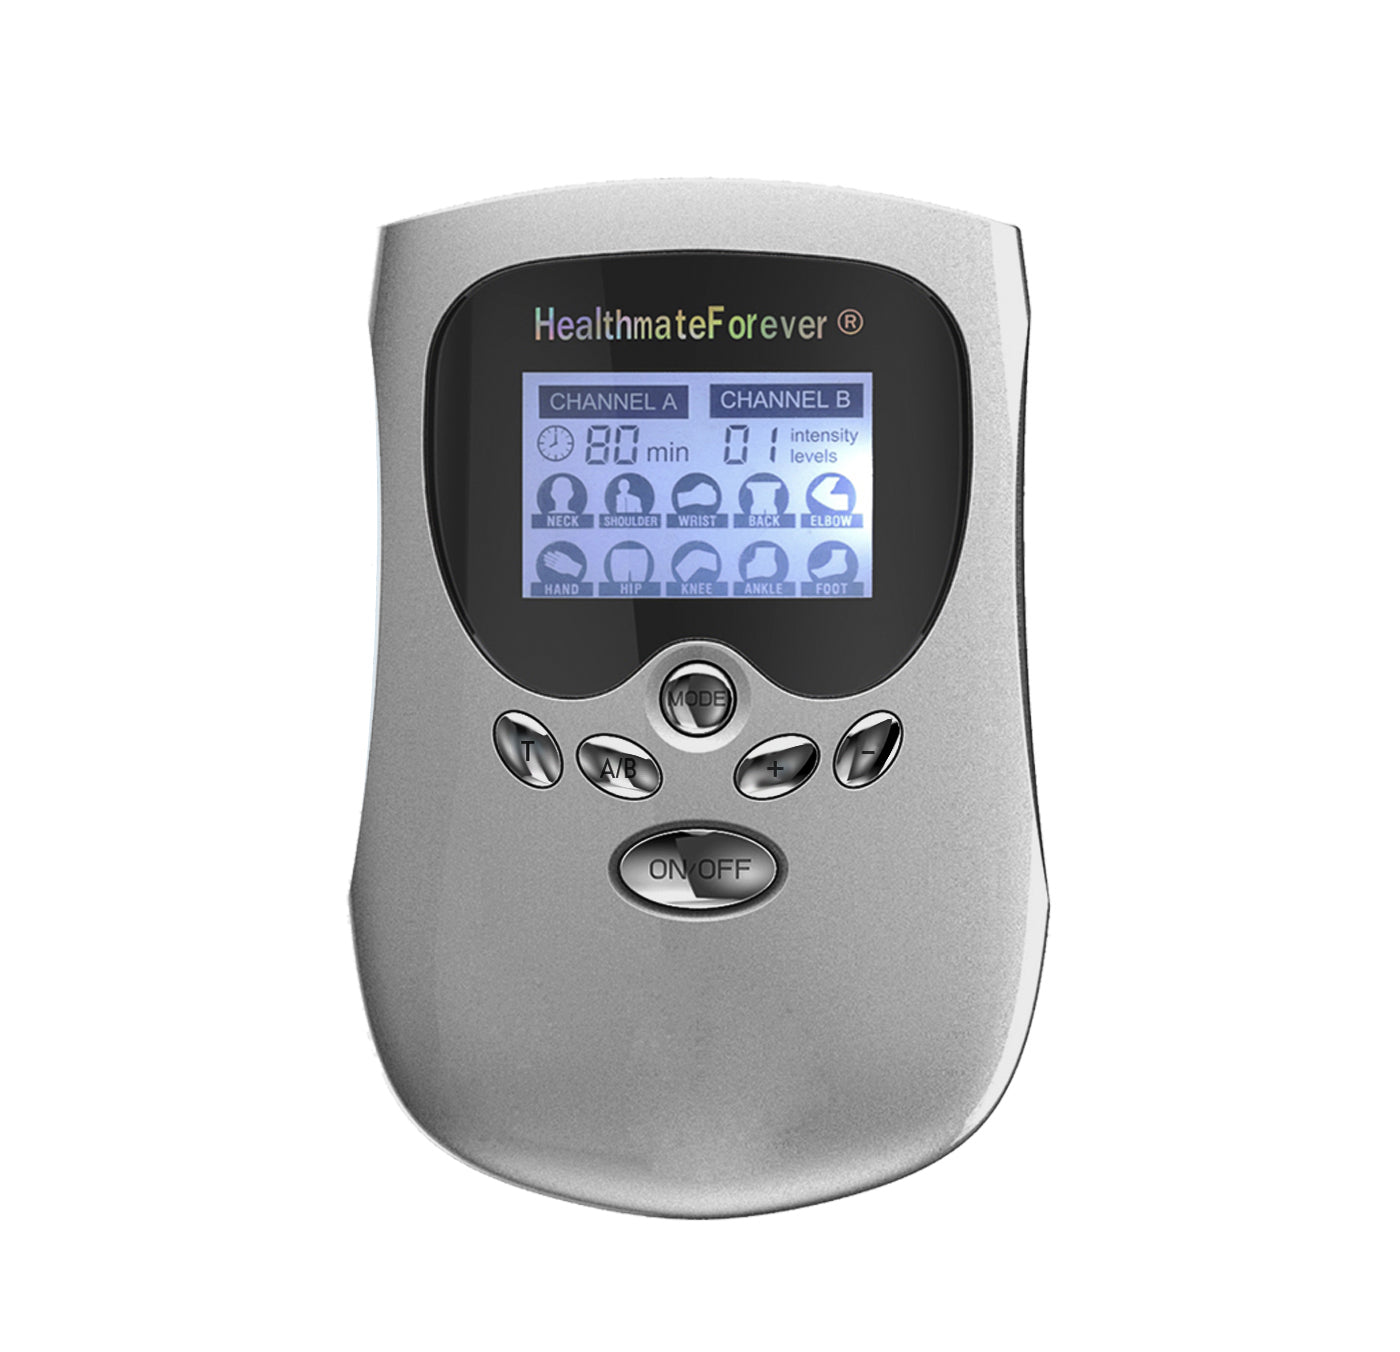 TENS Unit for Pain Management & EMS for Muscle Rehab - Ask Doctor Jo 